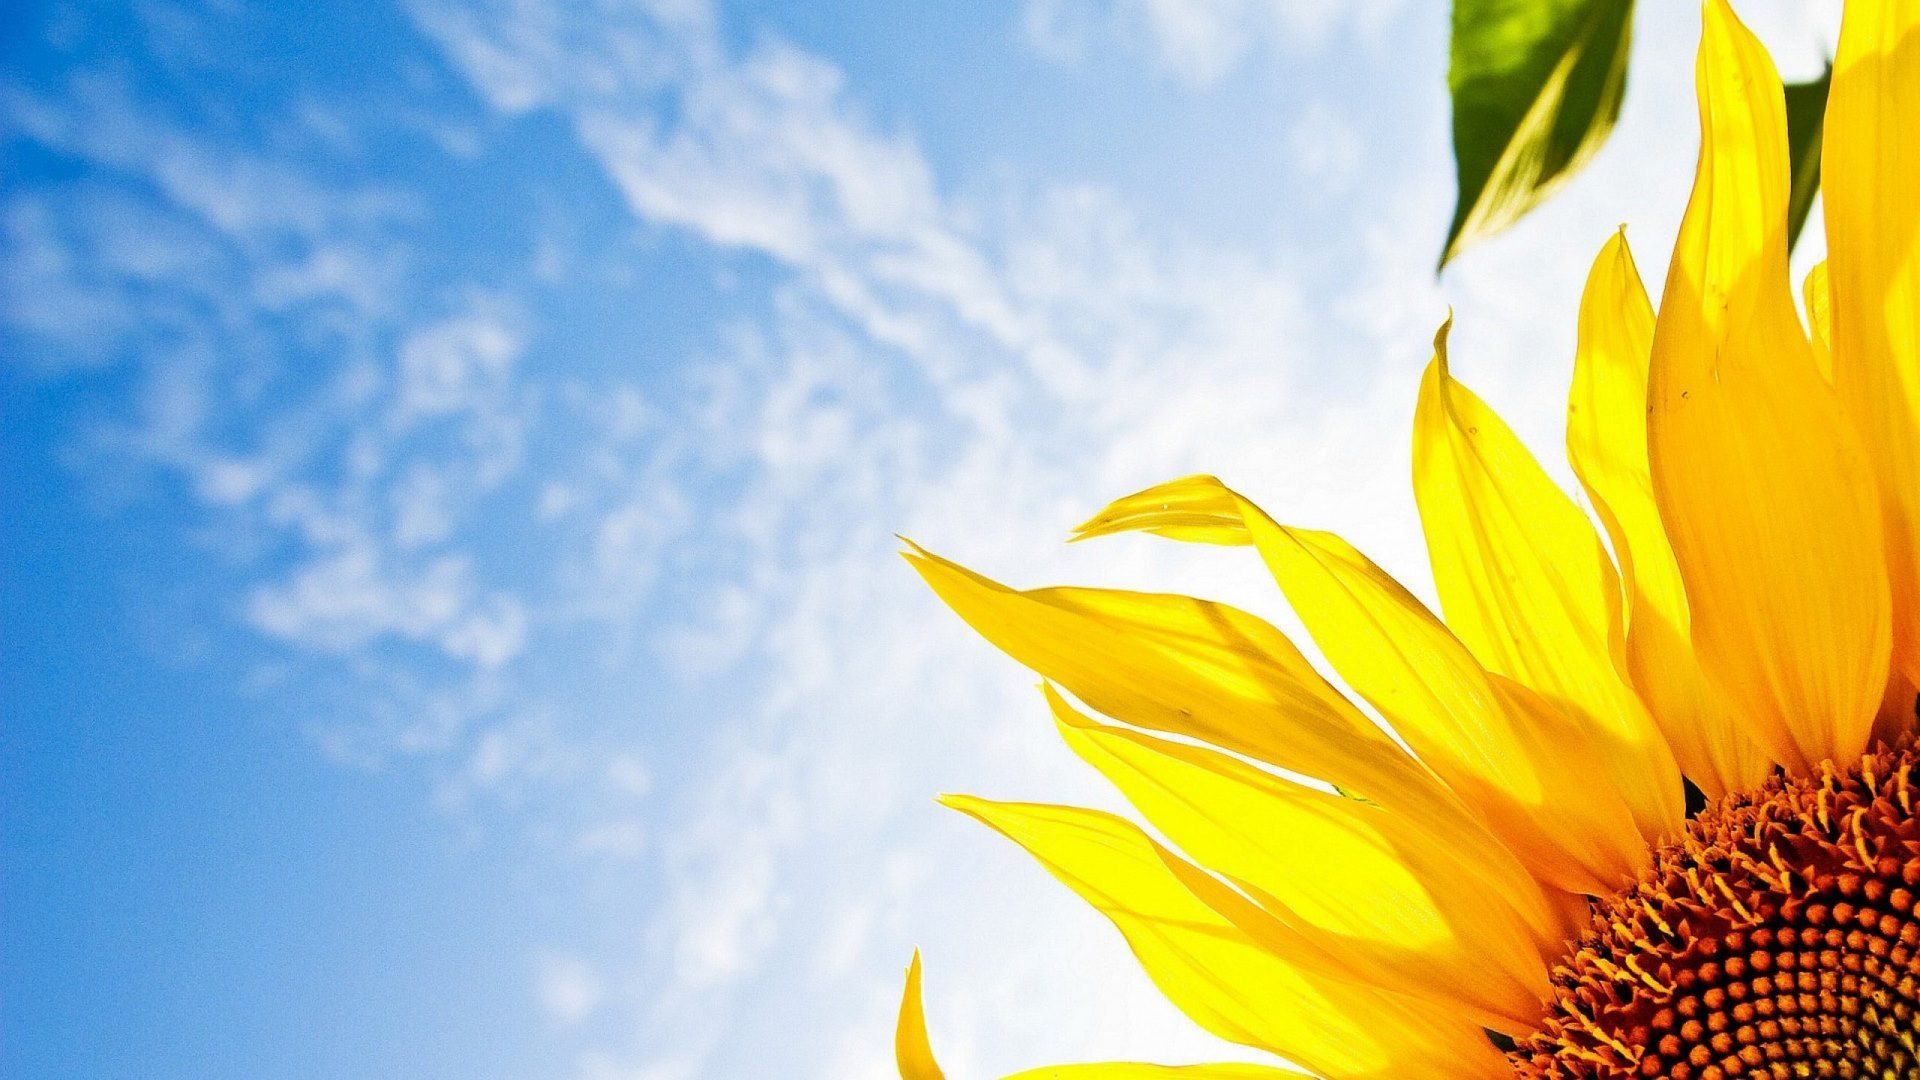 Wallpaper / hd, background, sunny, sunflower, sky, clouds, wallpaper, flowers, day, nature, sunshine, white, blue free download